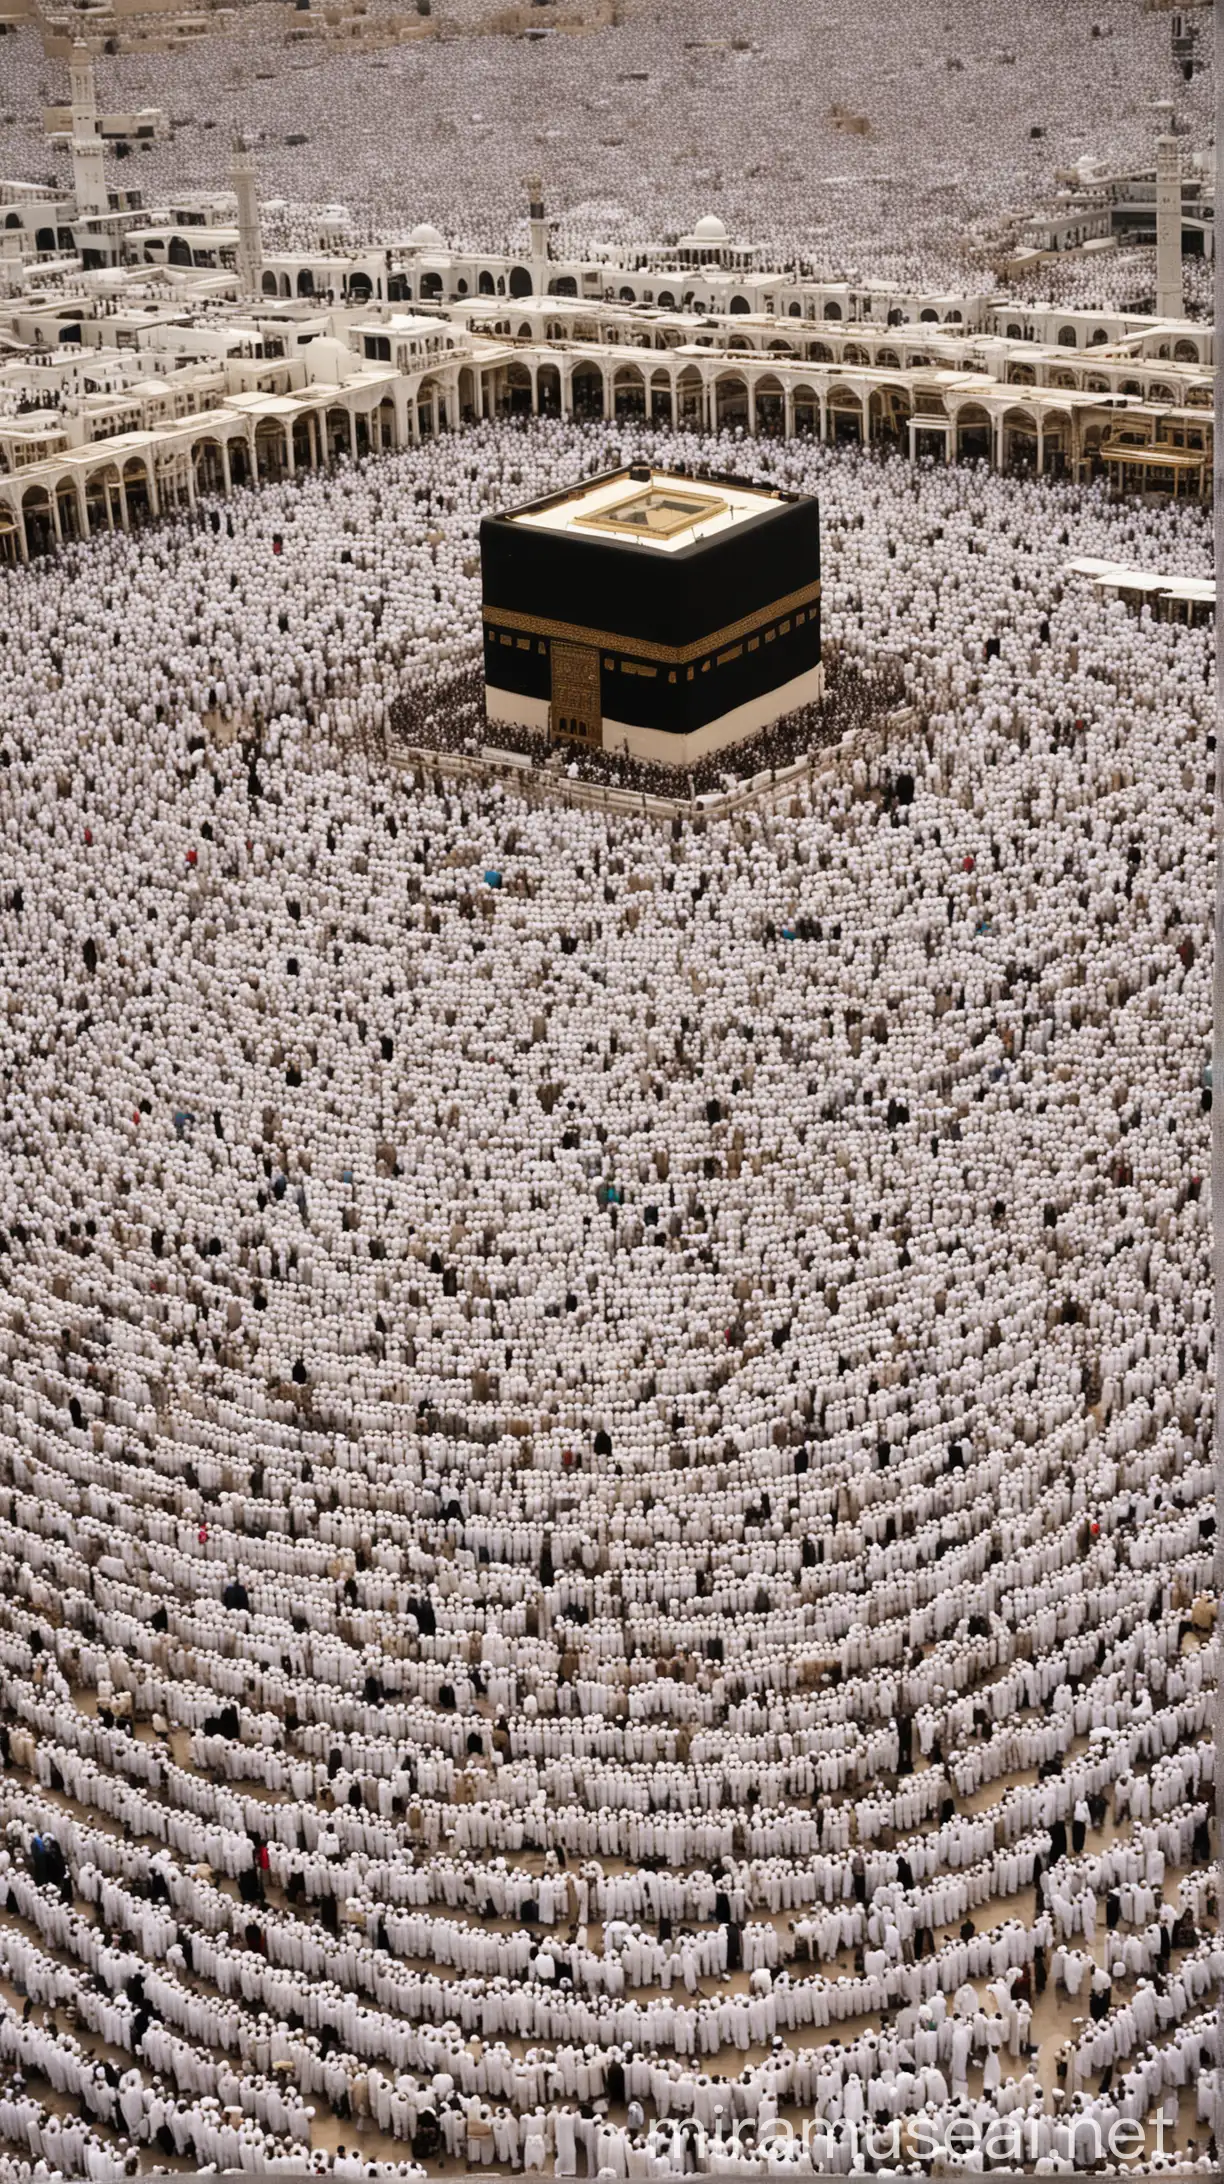 The Kaaba:
A serene landscape captures the sacred precincts of the Kaaba in Mecca, surrounded by the faithful in their white ihram garments. The structure, built by the esteemed Prophet Ibrahim, stands as a symbol of unity and devotion for Muslims worldwide. Its simple yet profound presence exudes an aura of tranquility, drawing pilgrims from every corner of the globe to embark on the spiritual journey of Hajj. with islammic tridition and HD anmd 4K